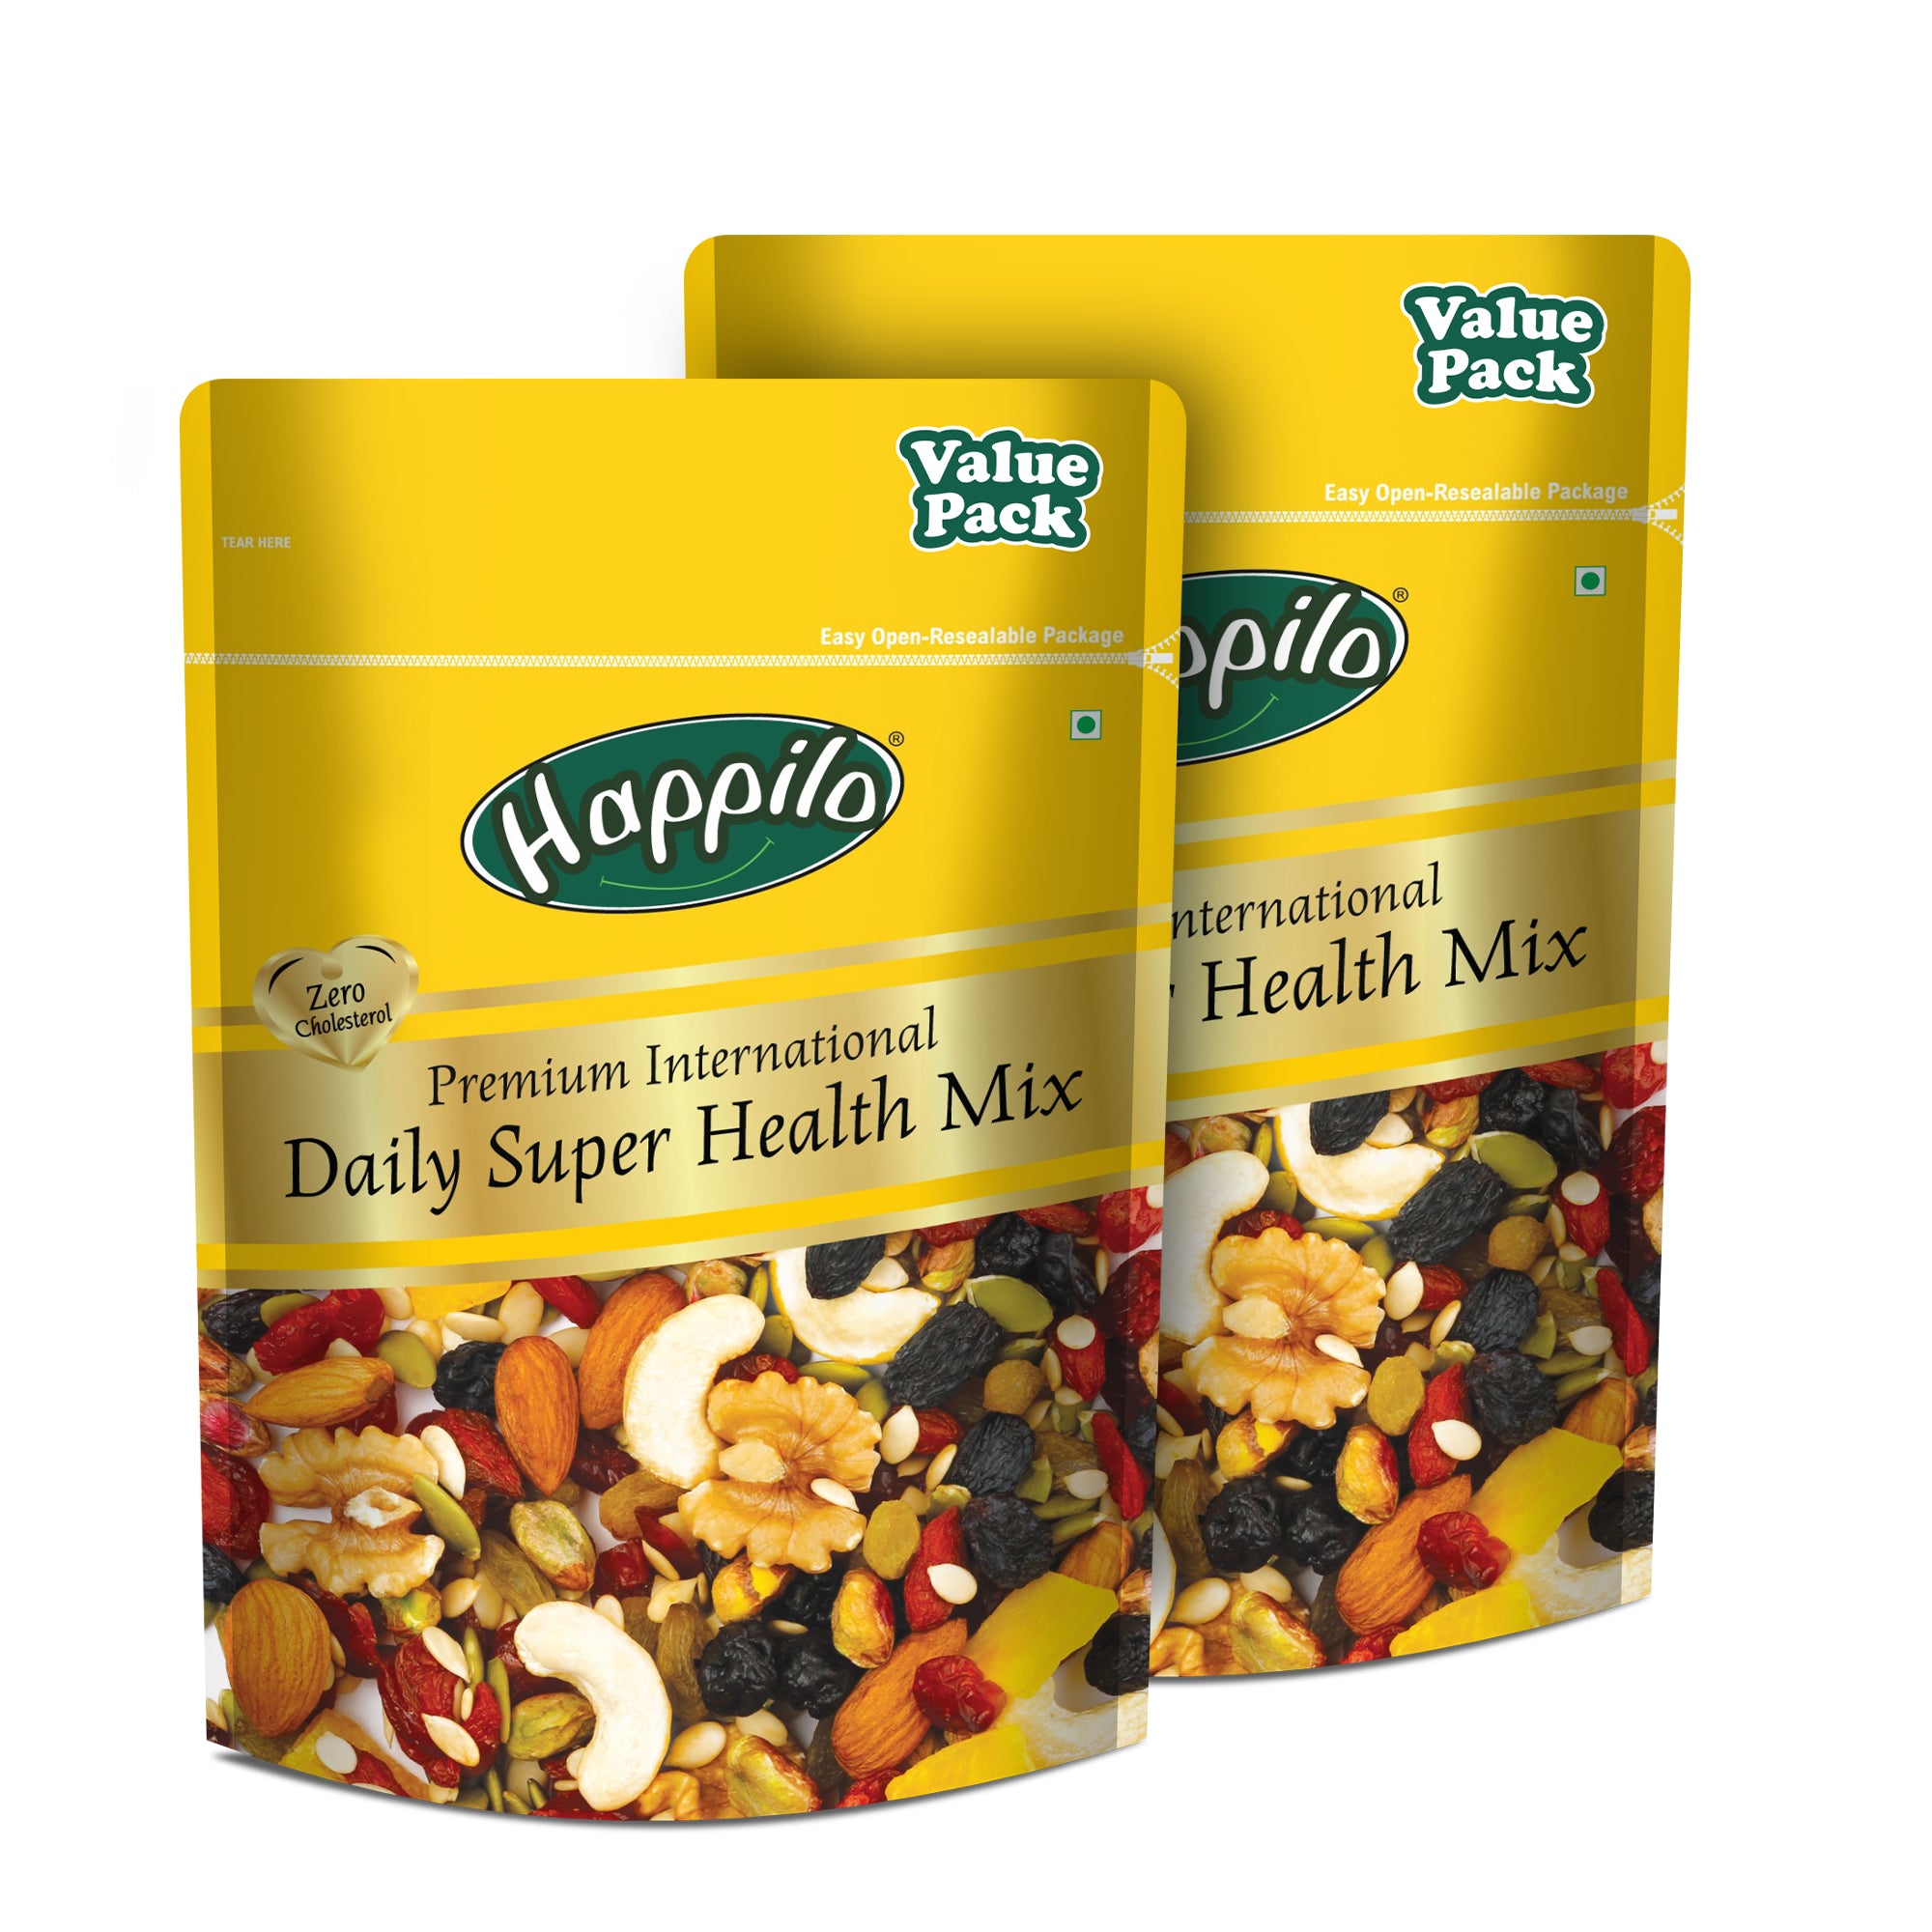 Daily Super Health Mix Snack